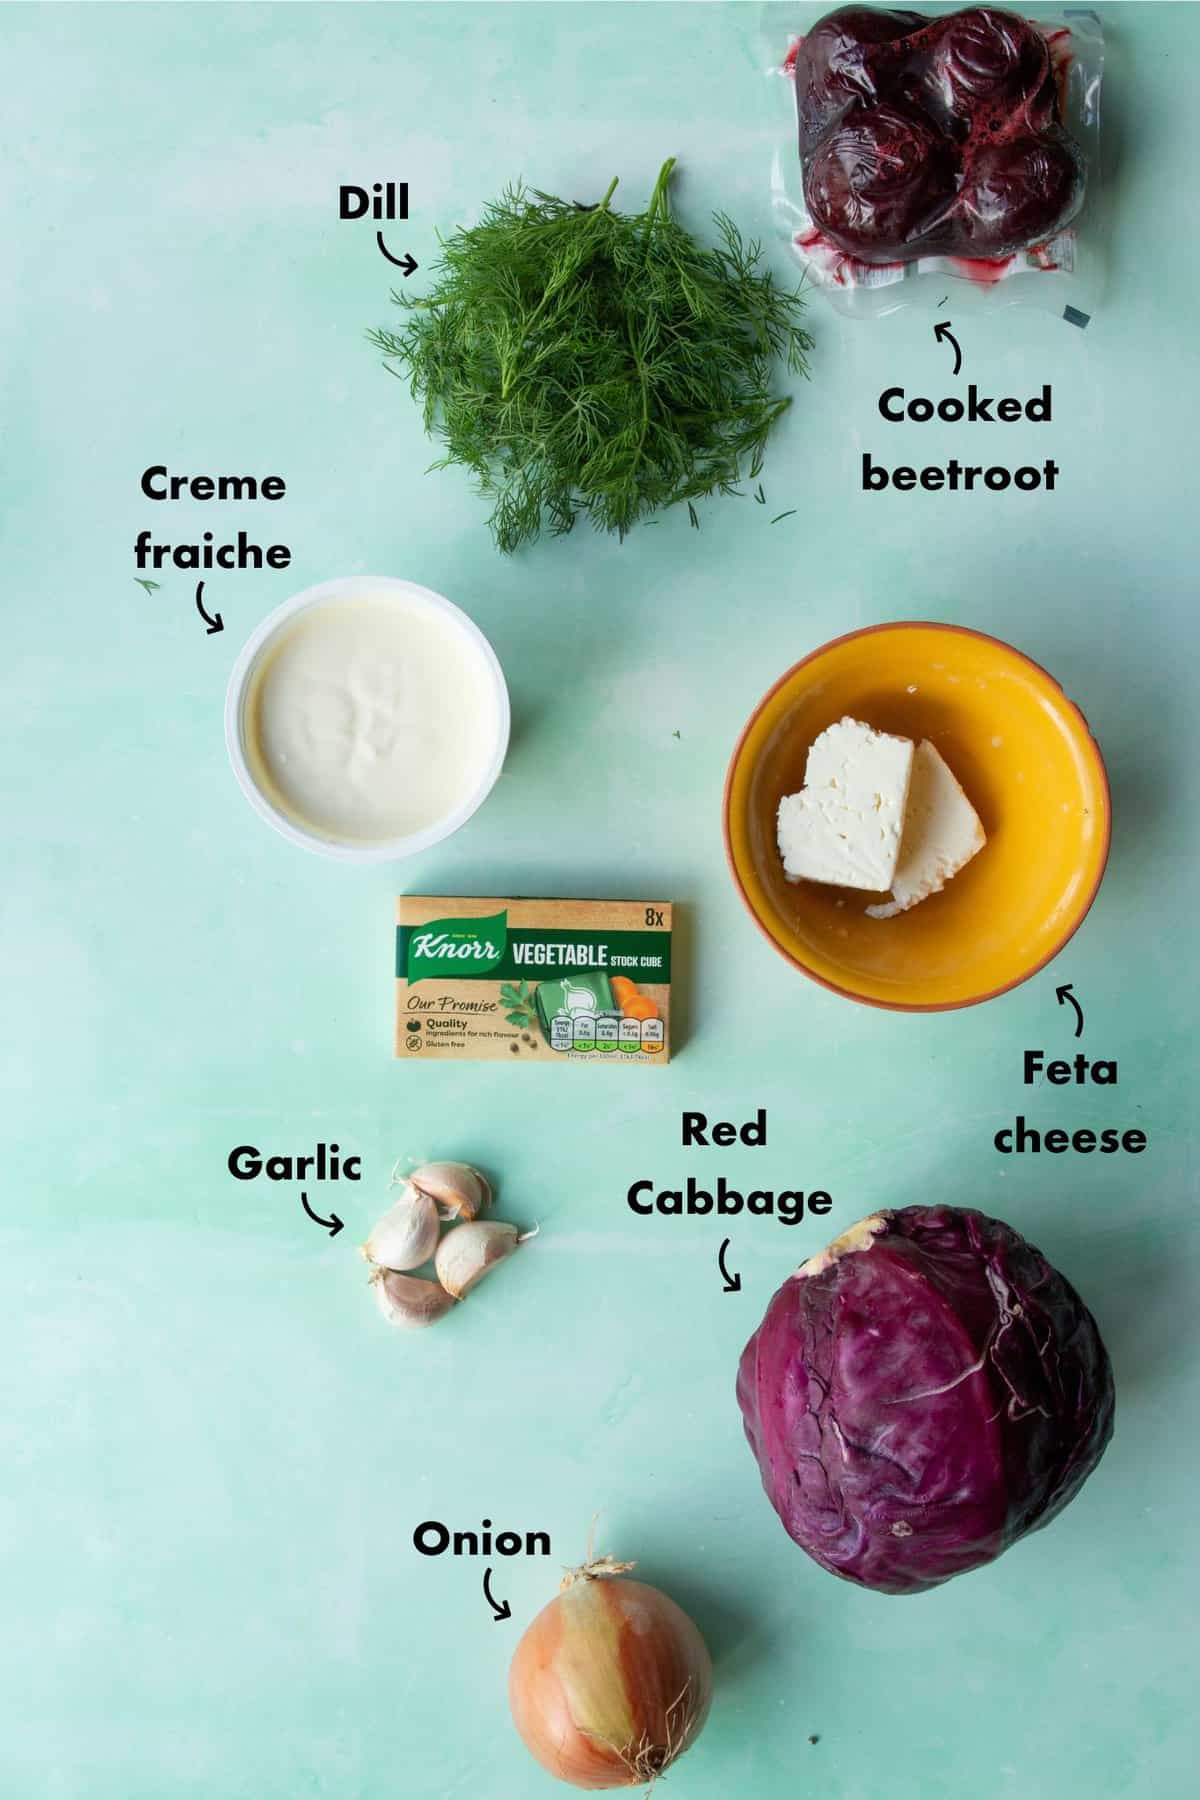 Red Cabbage soup ingredients shot including ; dill, feta, beetroot, creme fraiche red cabbage, onion, garlic and Knorr vegetable stock.